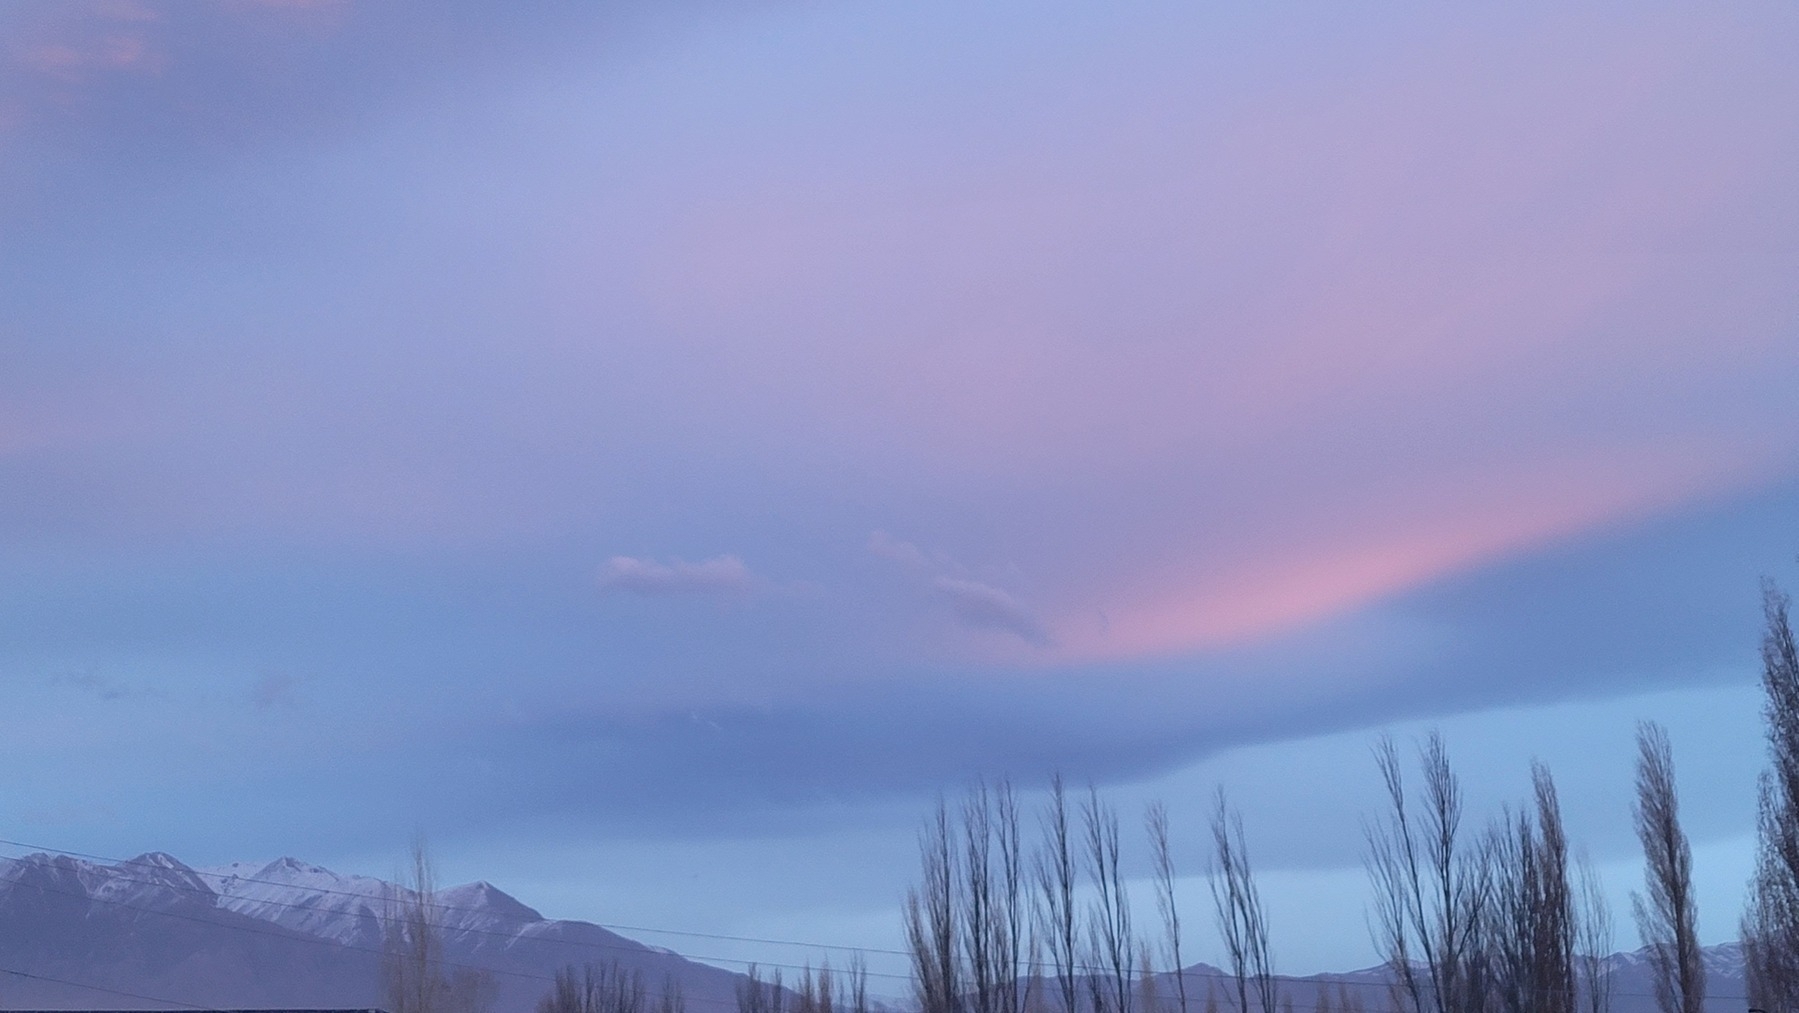 sky which looks like 3 layers of blue and a layer of pink over it. mountains in the lower left corner with power lines visible in front of them. trees sticking up from the bottom right